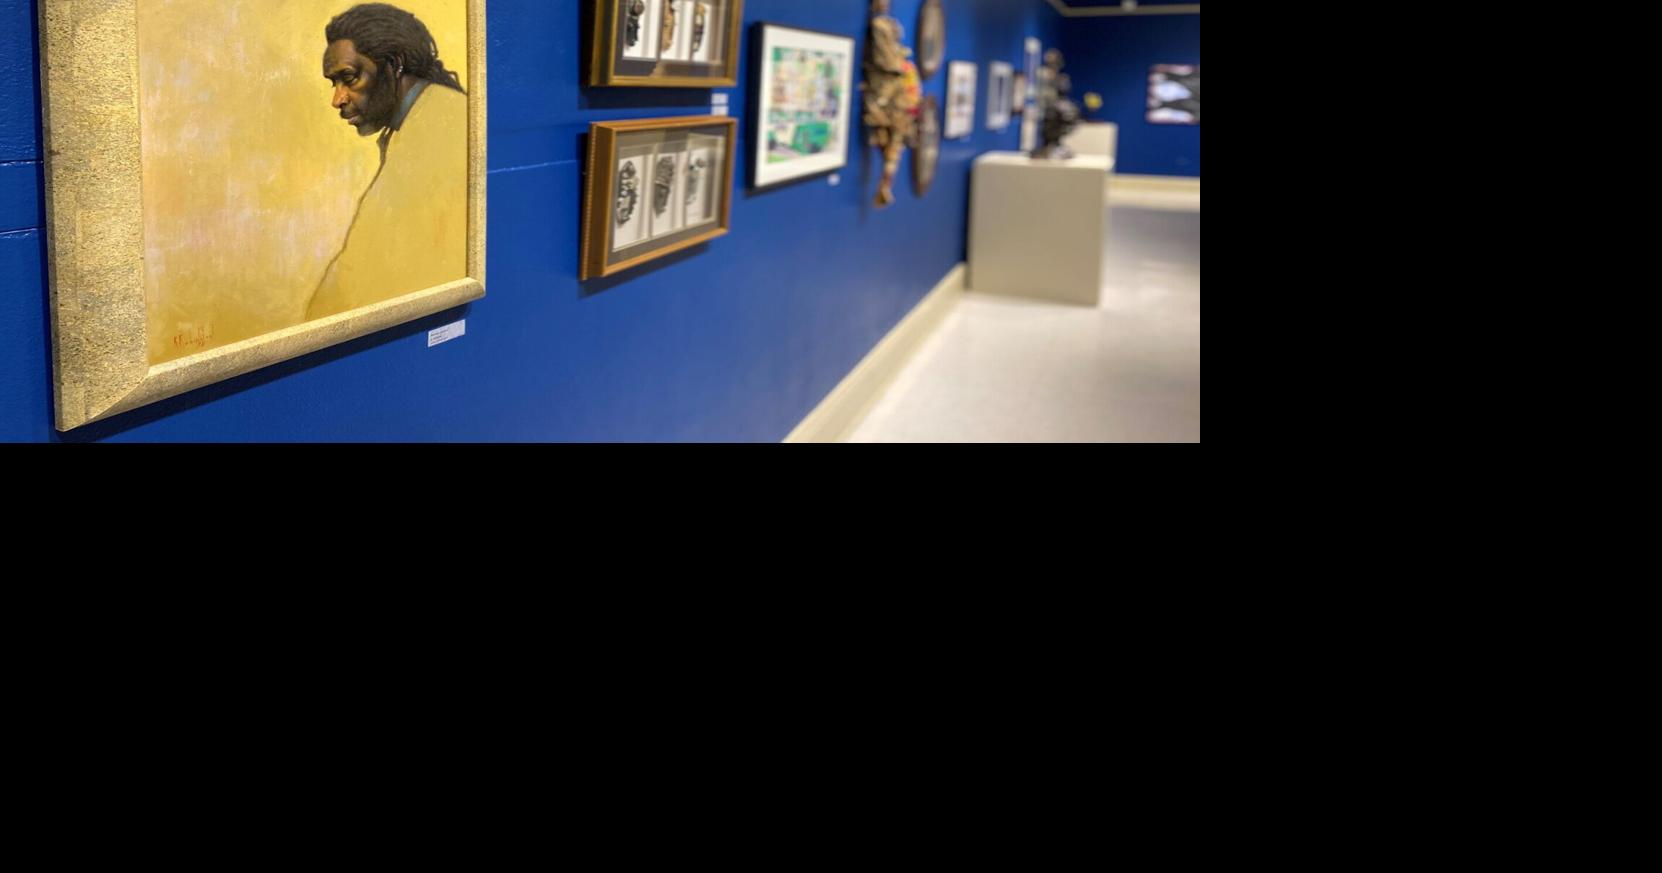 ETSU’s Reece Museum Wins State Award Of Excellence